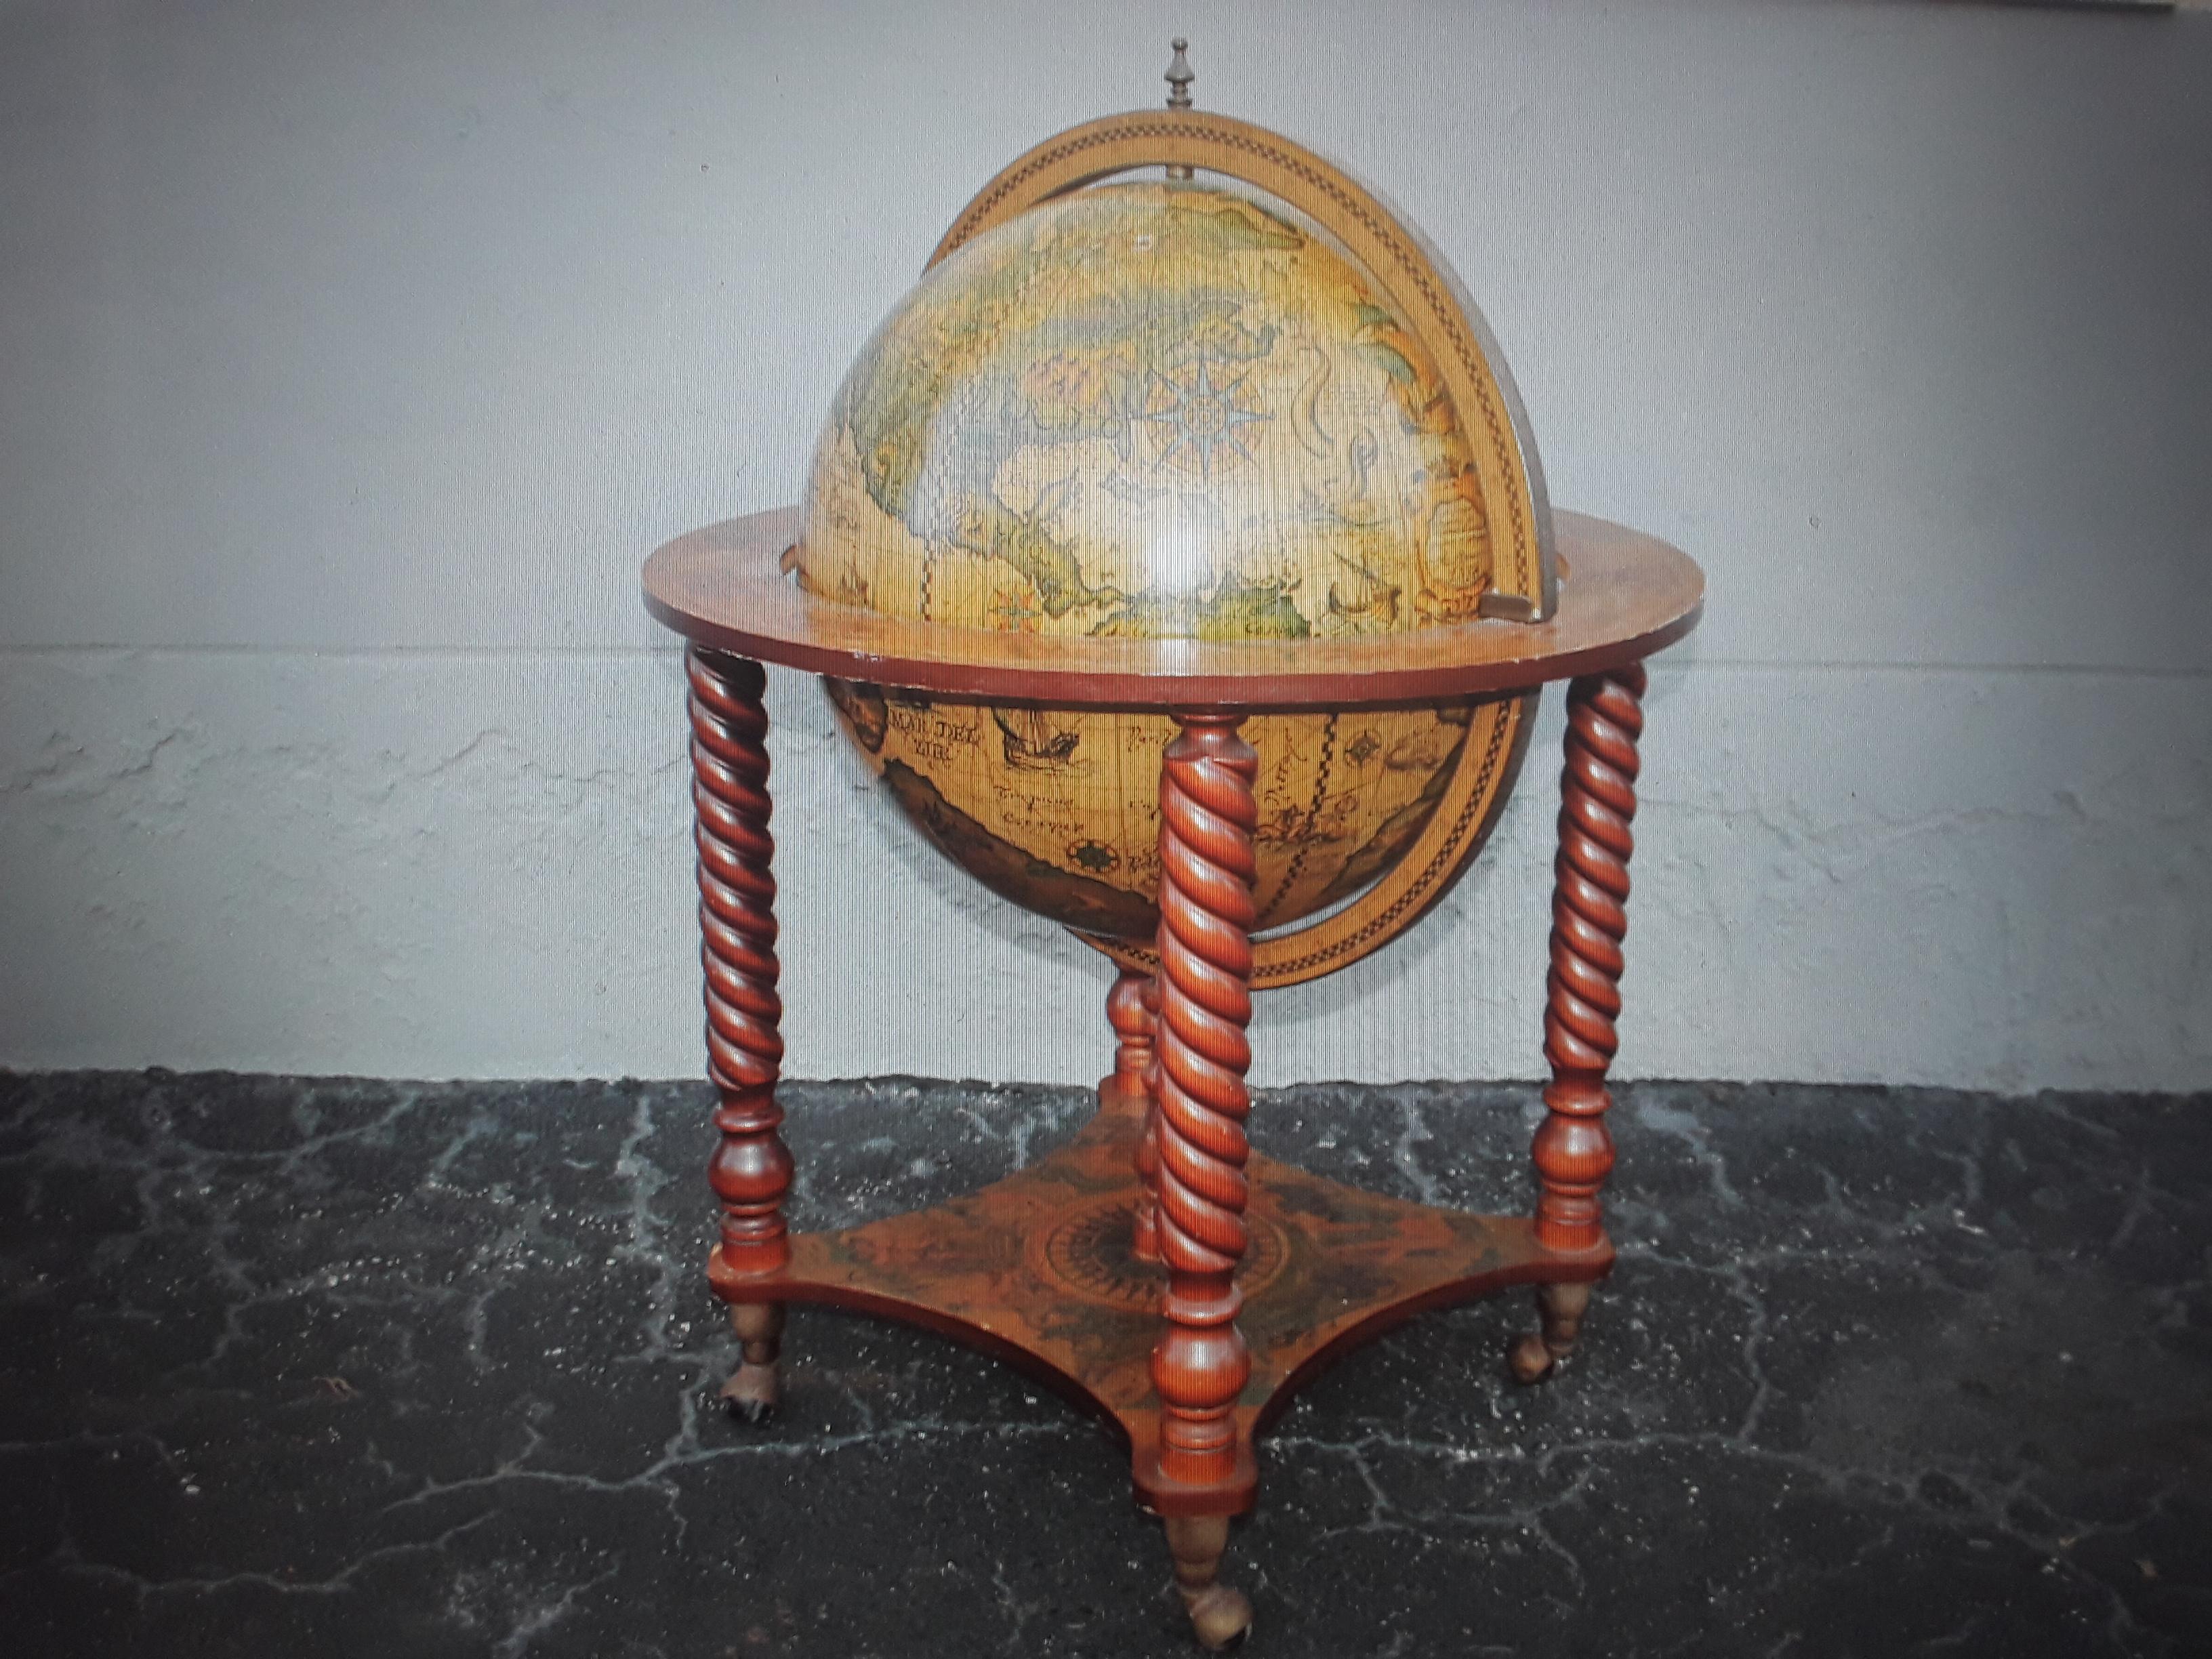 1960's Mid Century Modern World Globe Dry Bar. Top half opens to reveal bottle storage. Very nice art work. Turned wood supports.